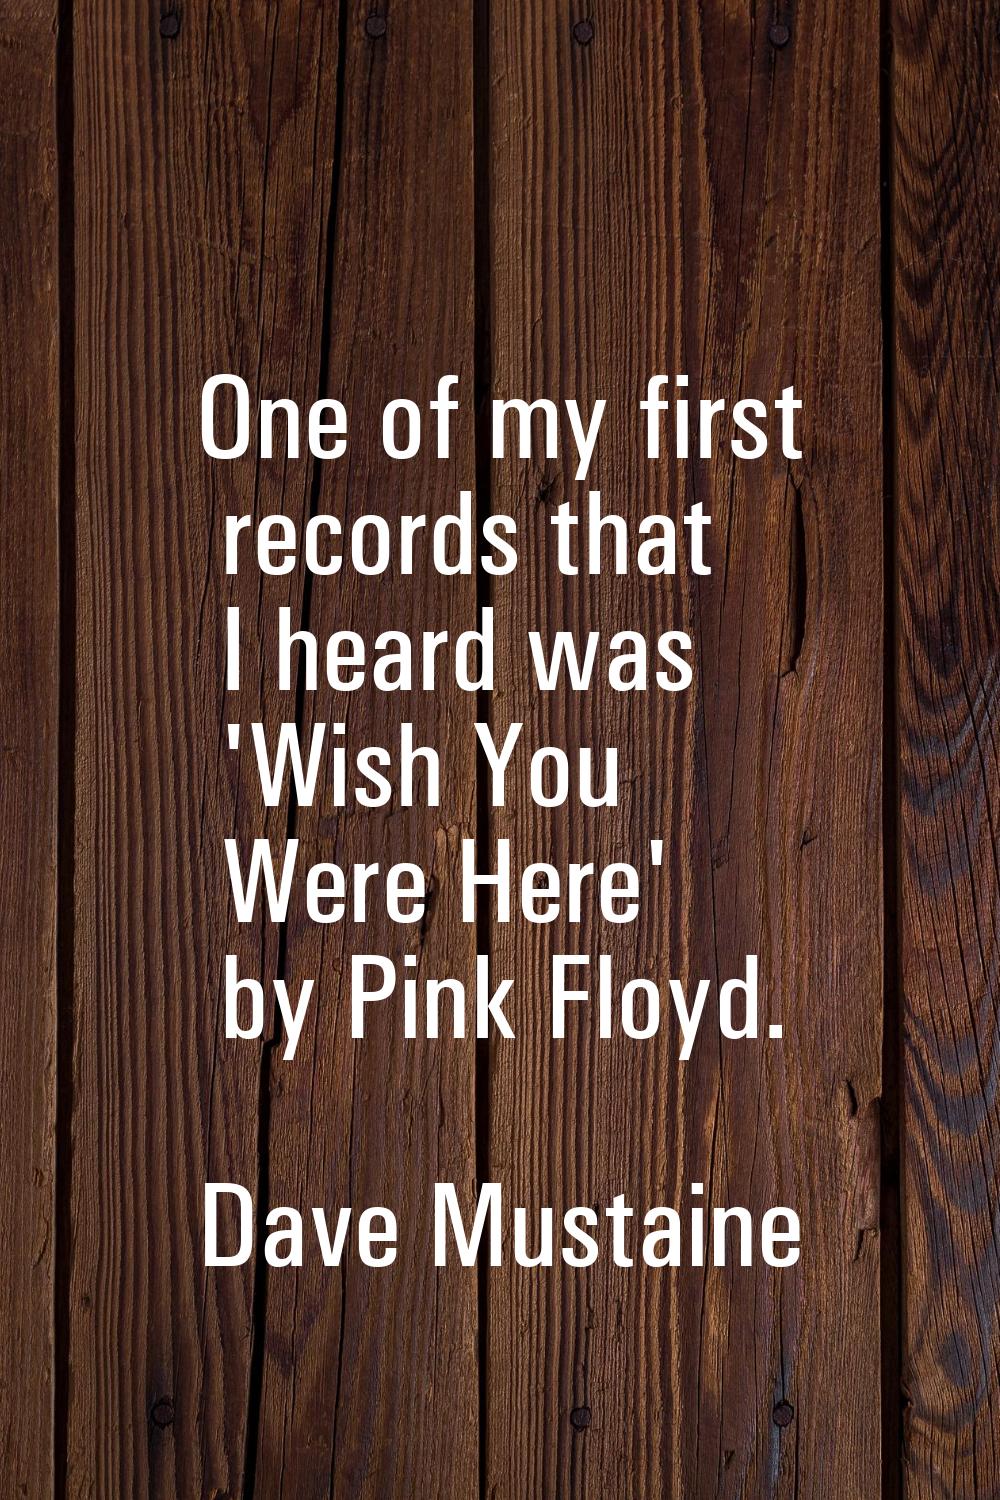 One of my first records that I heard was 'Wish You Were Here' by Pink Floyd.